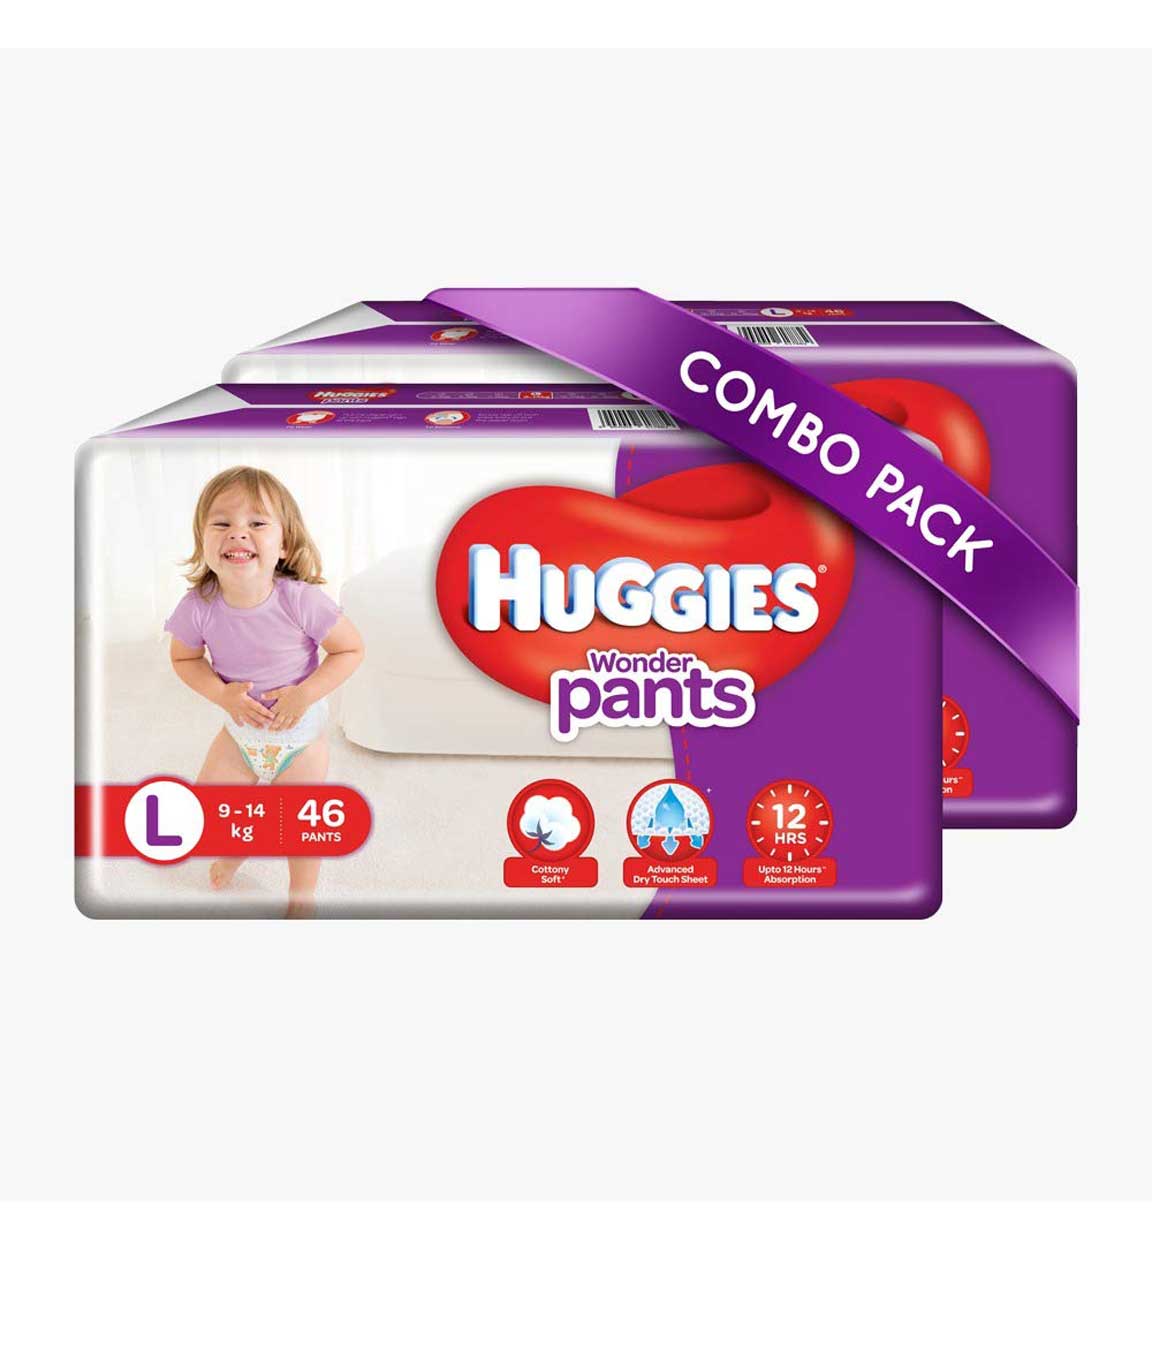 Huggies Wonder Pants Large Size Diapers Combo Pack of 2, 46 Counts Per Pack 92 Counts